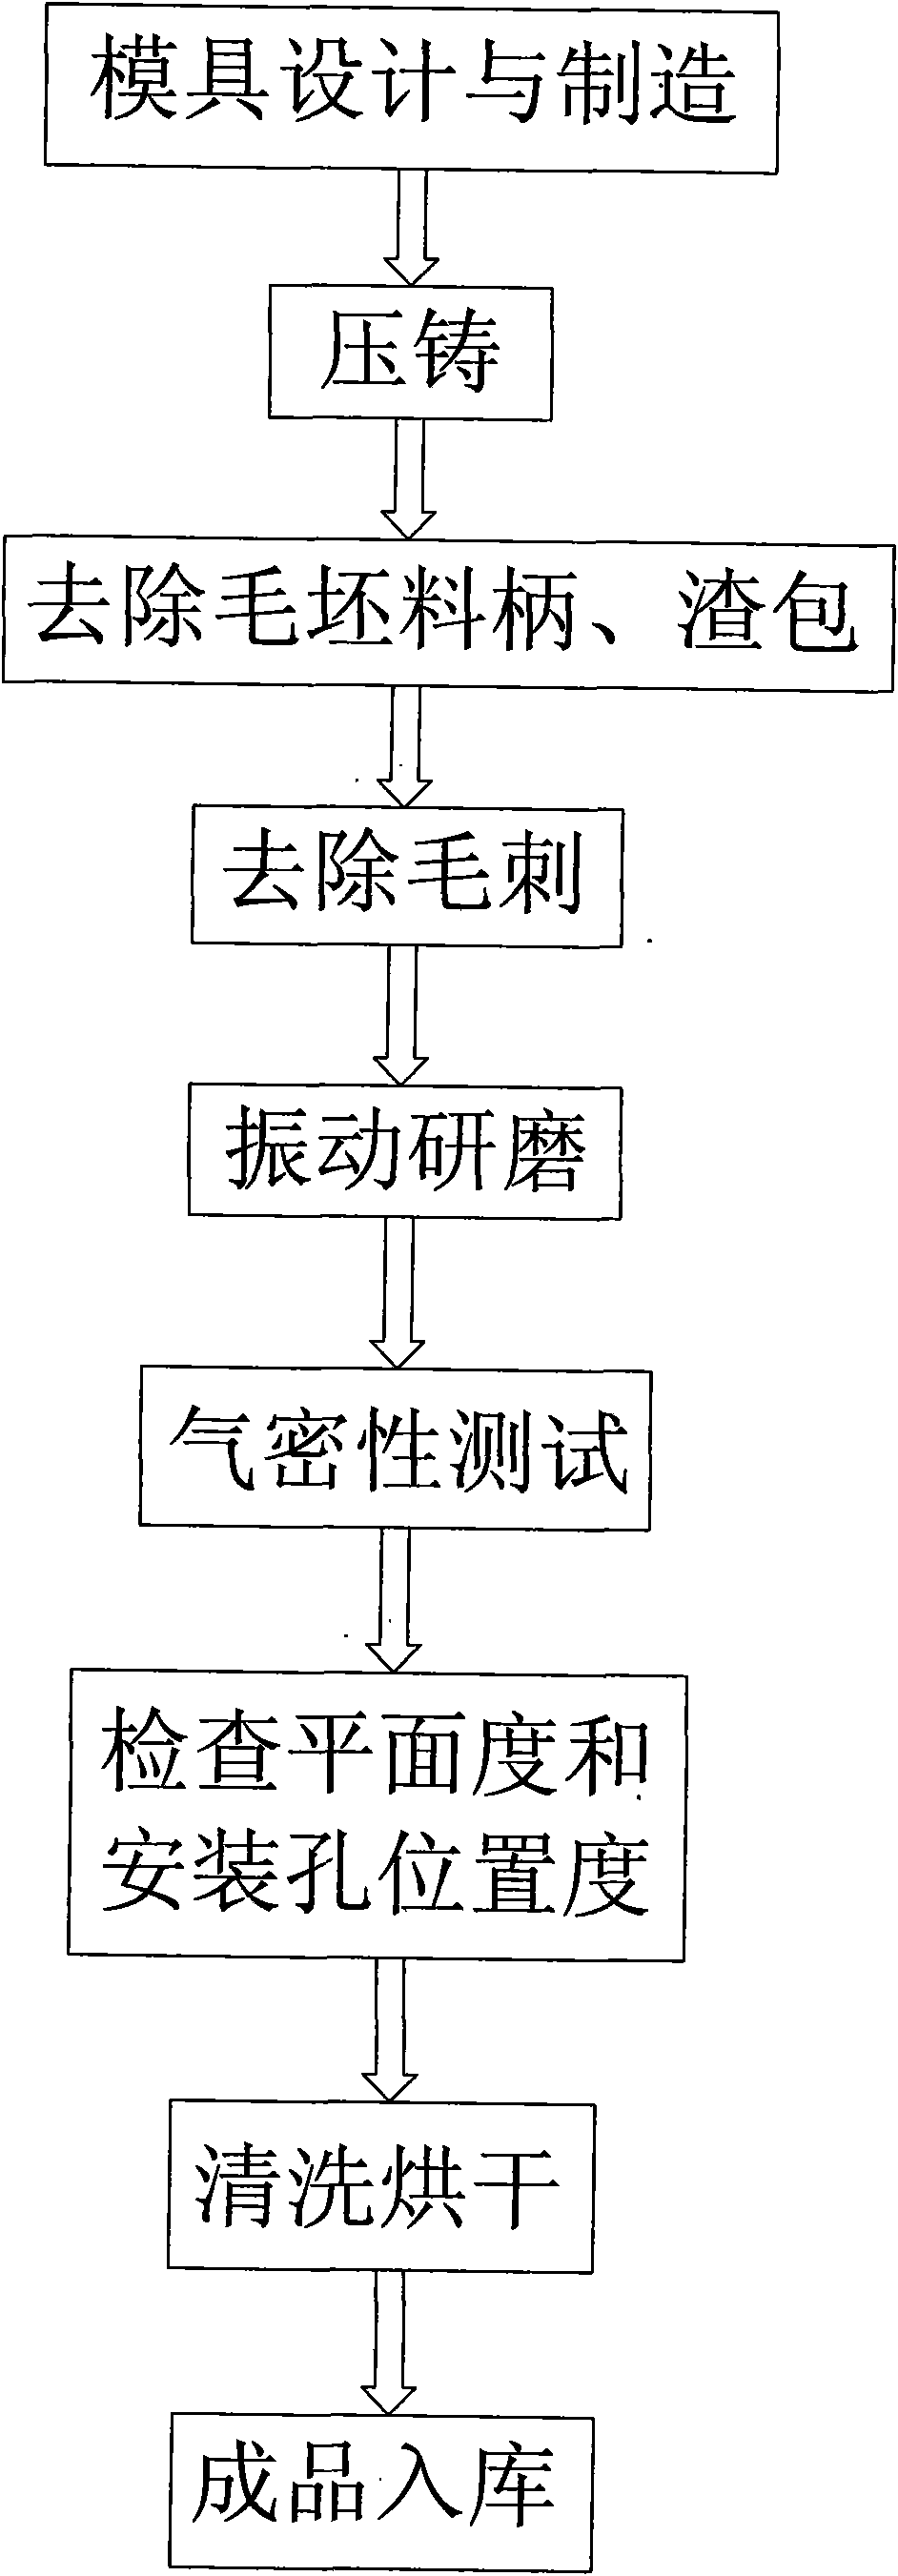 Method for manufacturing shell of electronic controller for vehicle